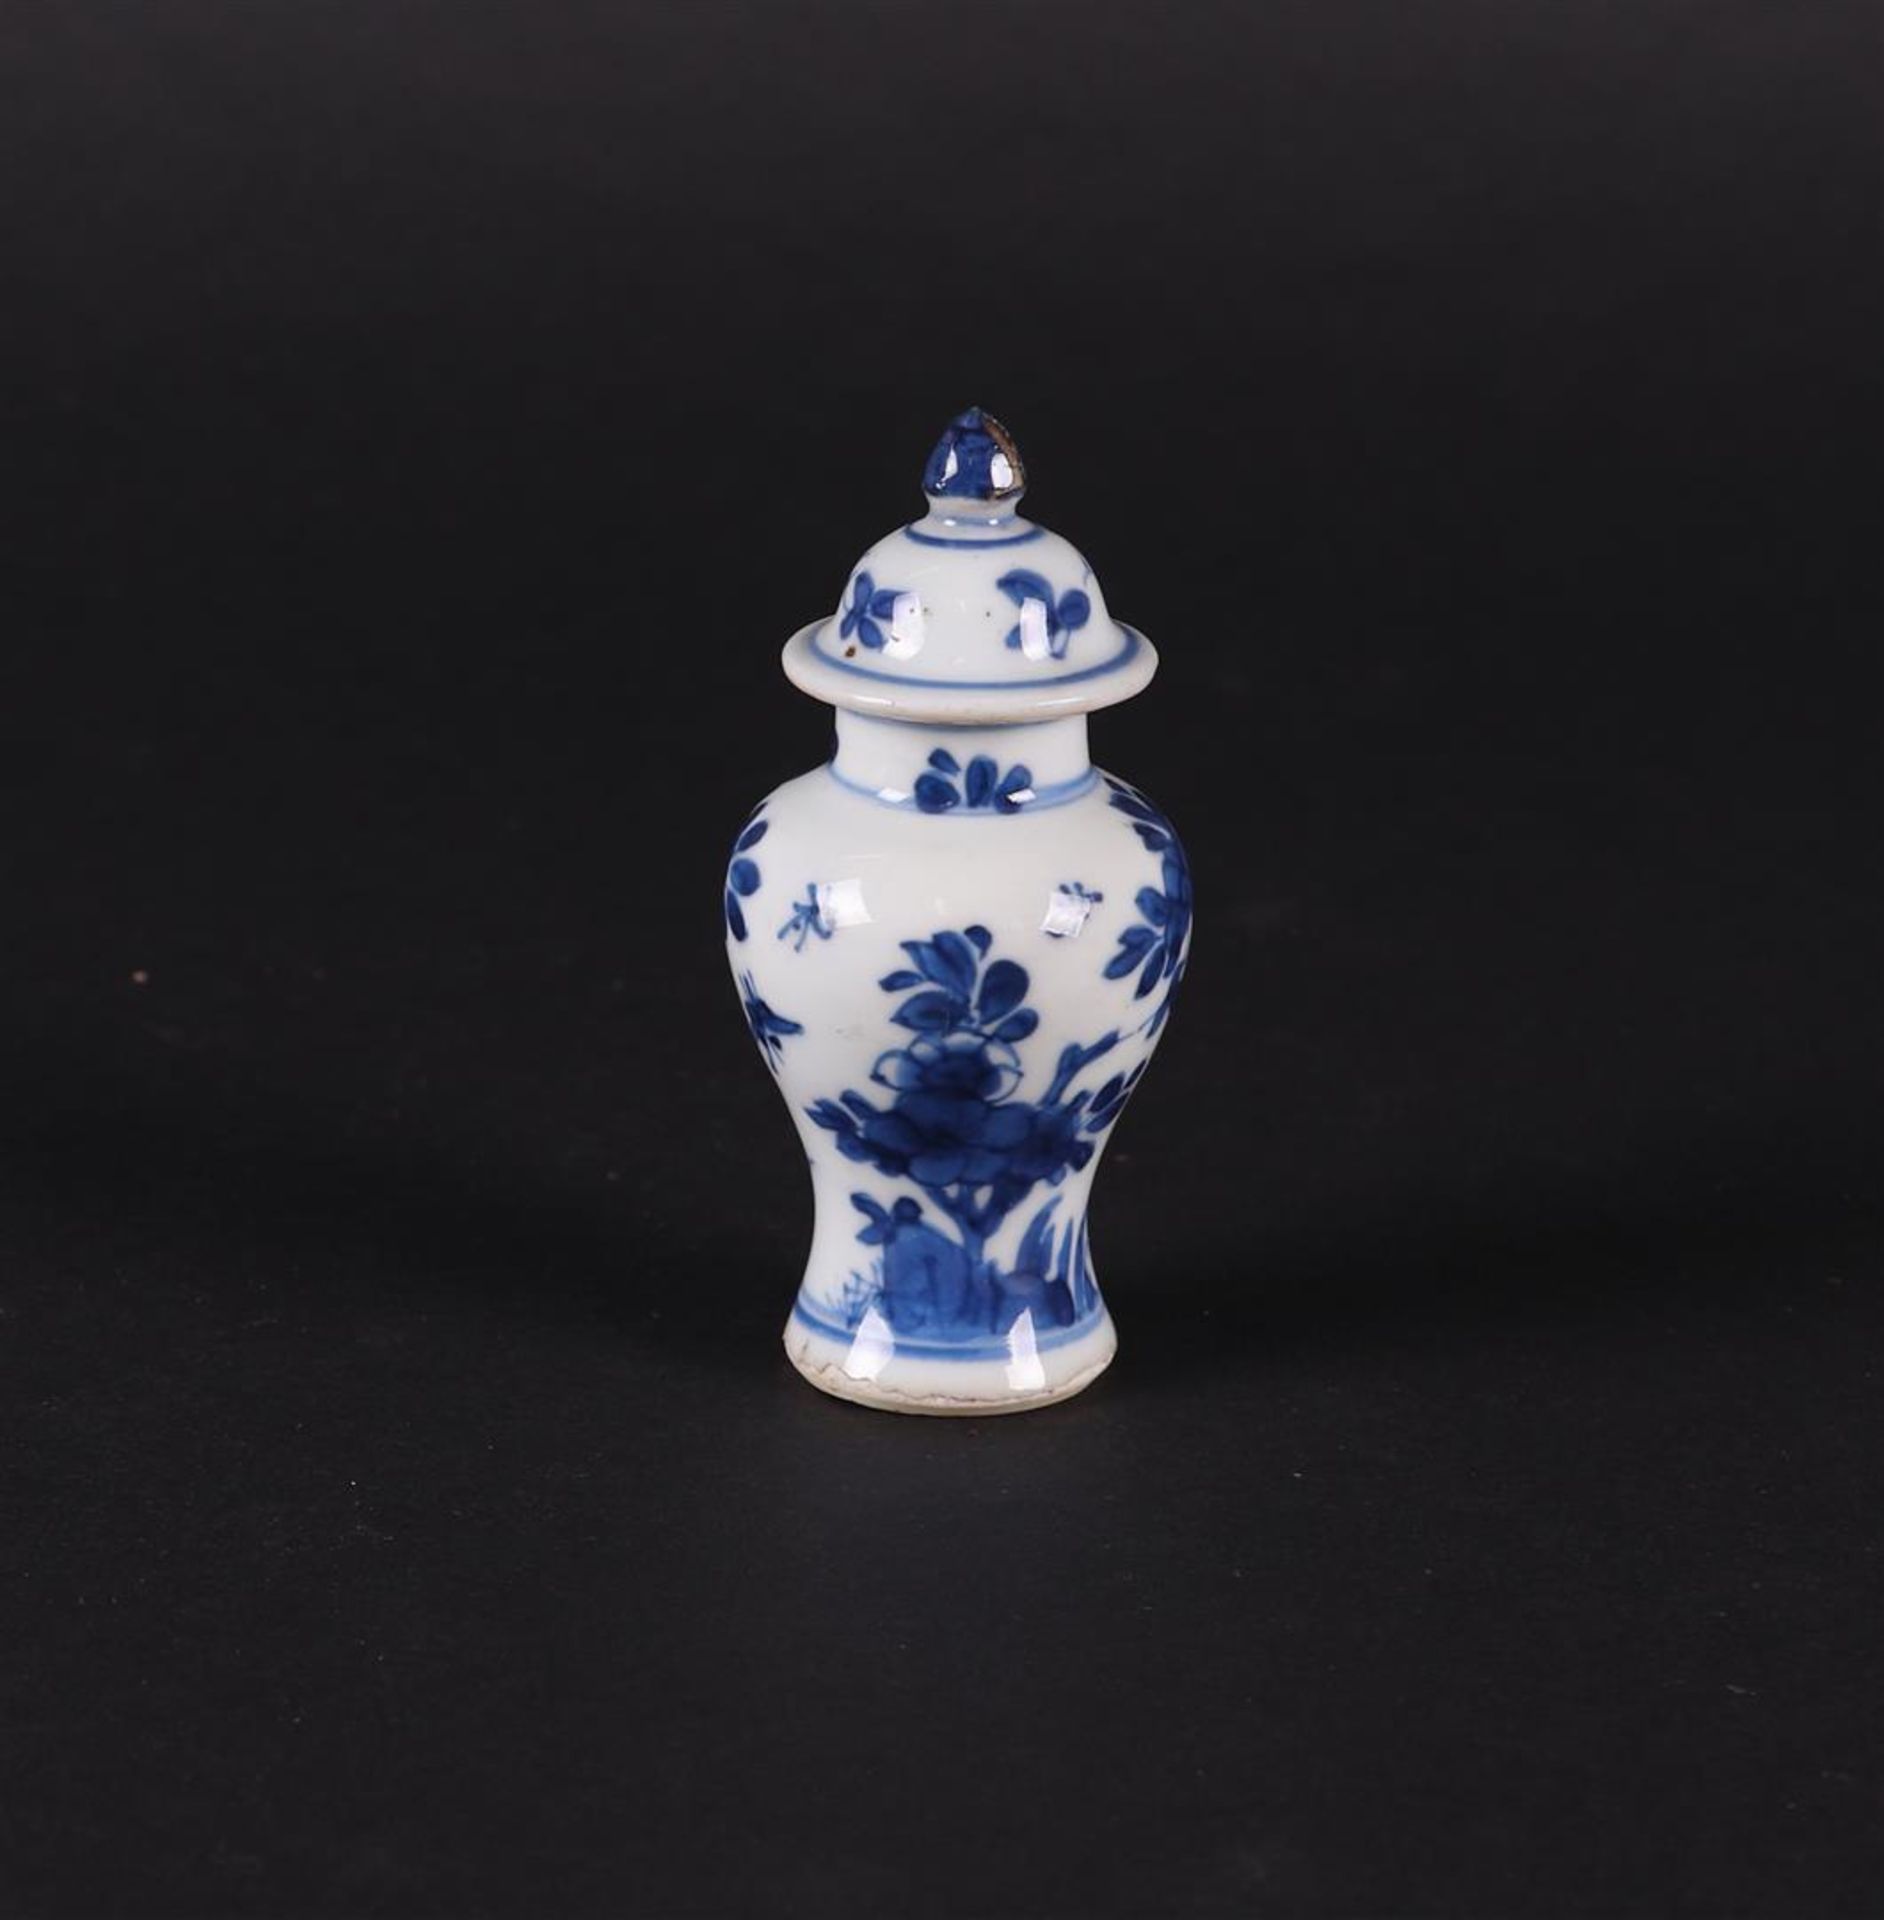 A porcelain baluster-shaped lidded vase with a rich floral decoration with insects in between.